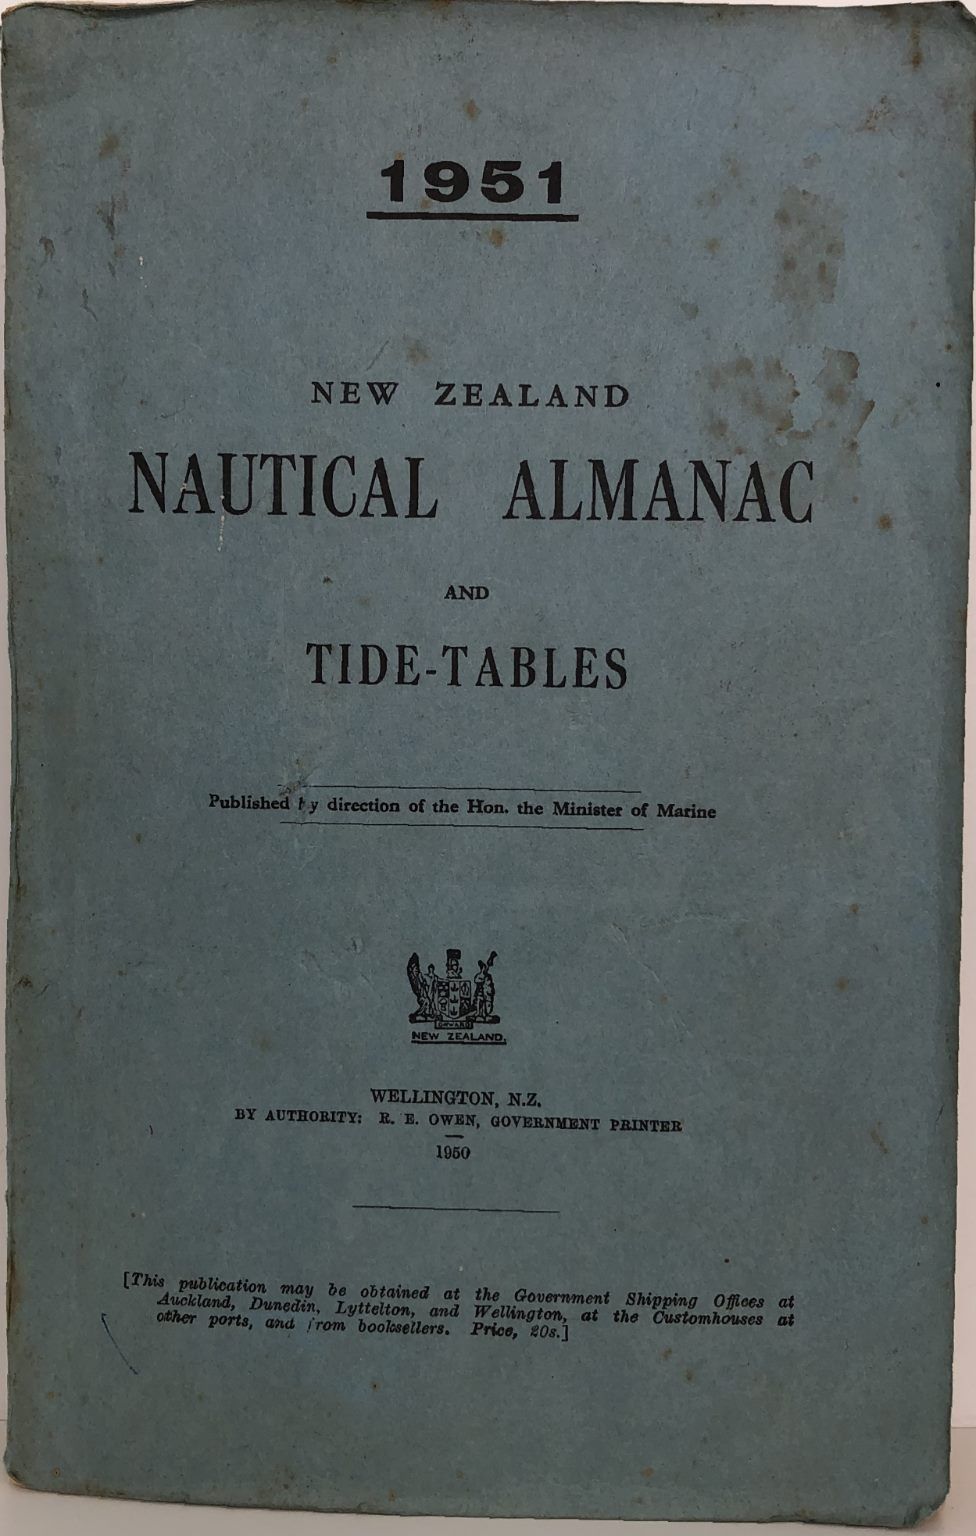 NEW ZEALAND NAUTICAL ALMANAC and TIDE TABLES 1951